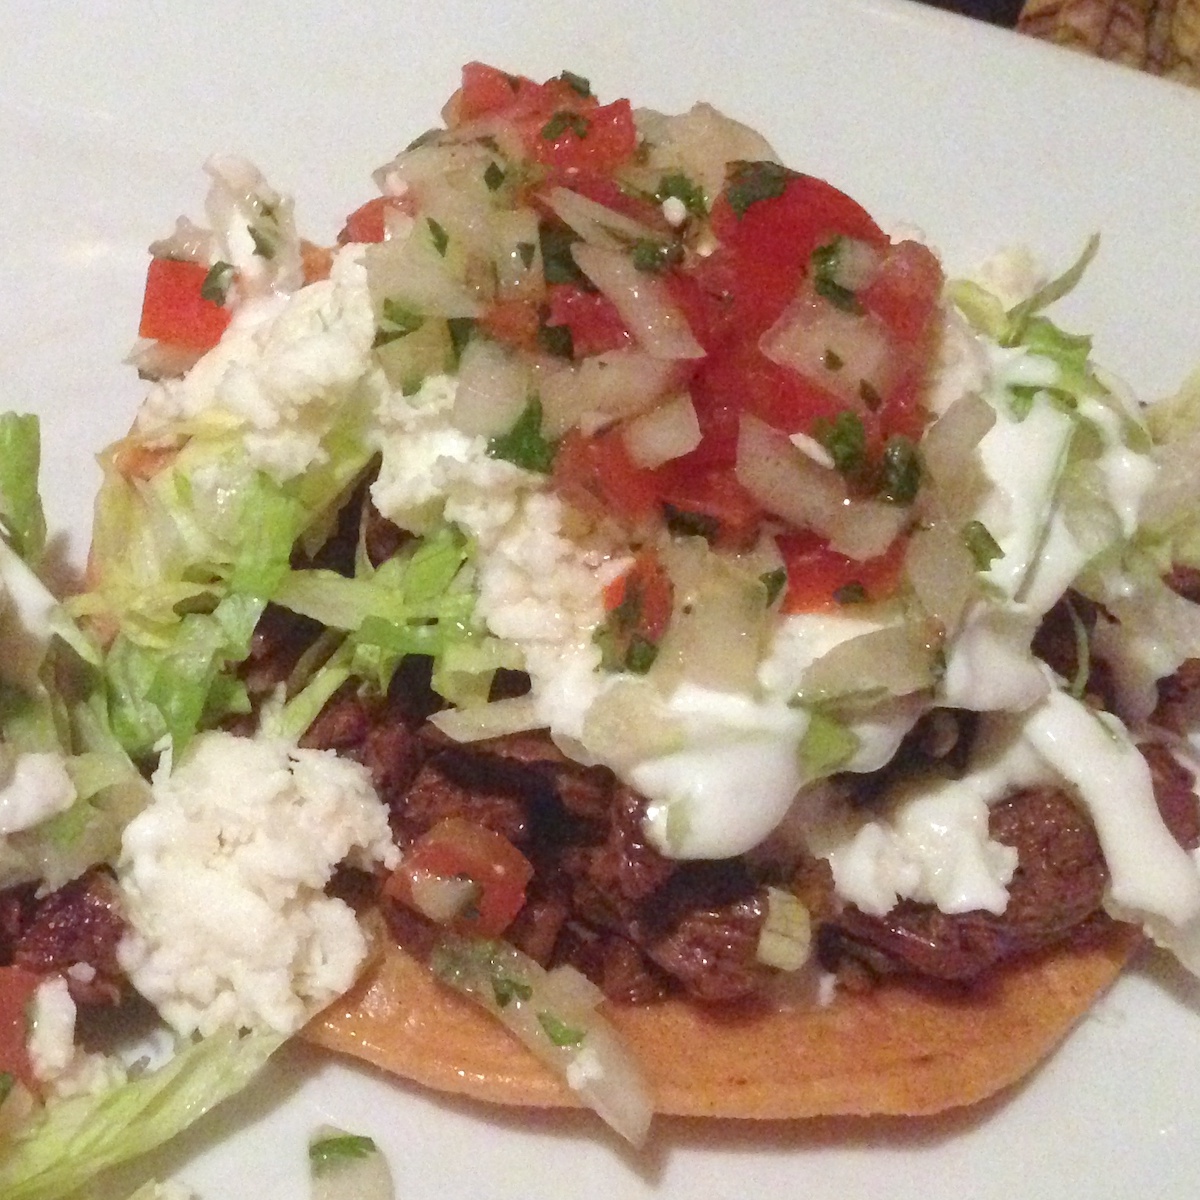 Tostada from Z-Cocina Mexicana Food Truck